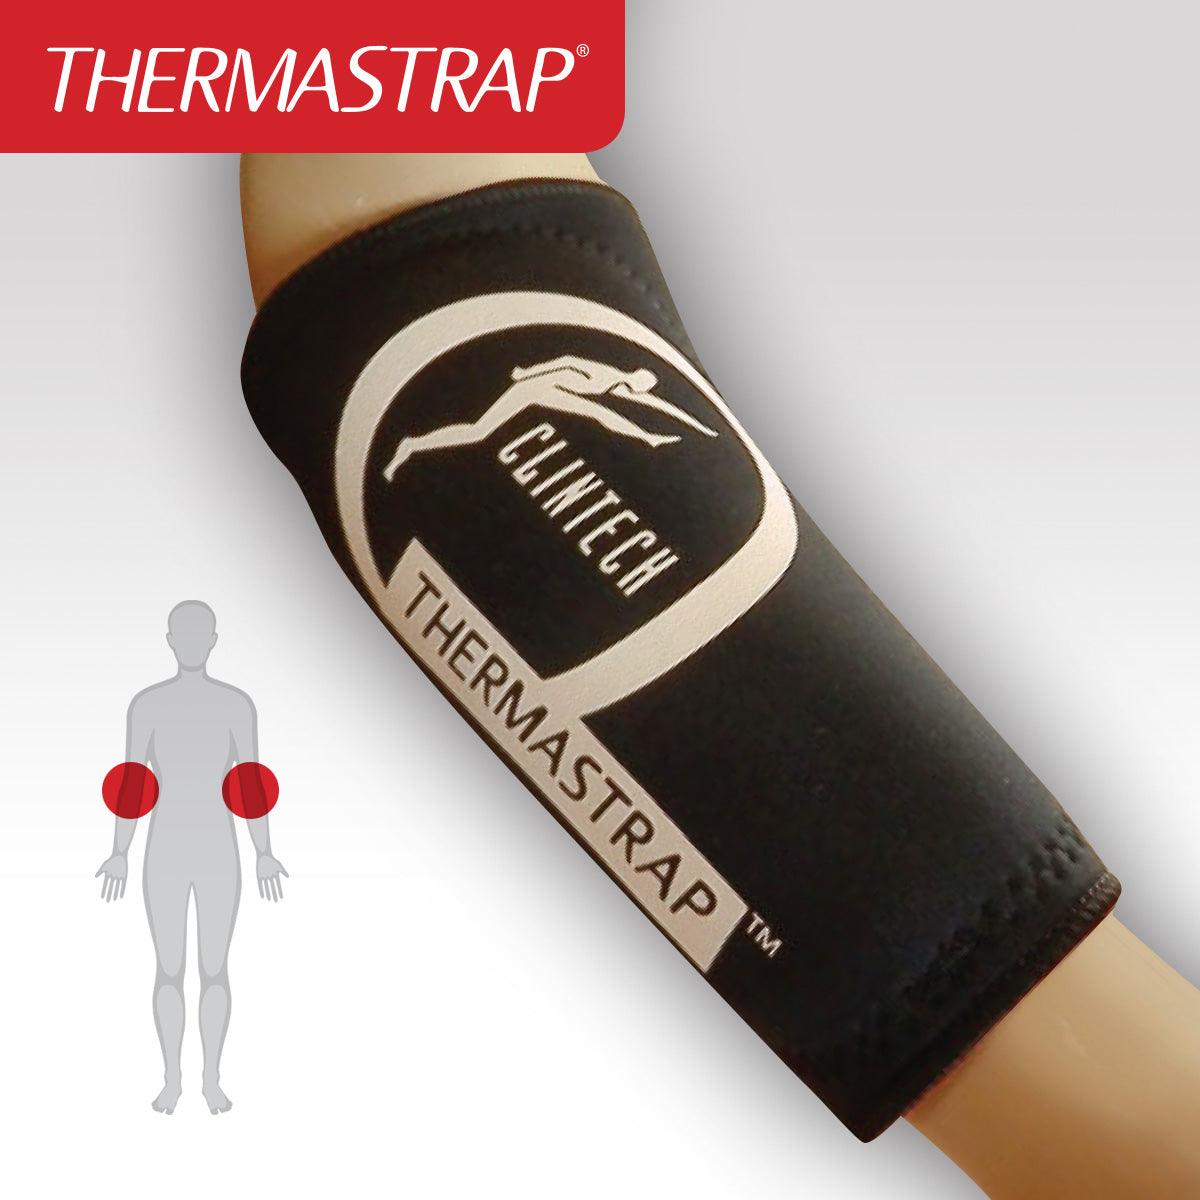 Thermastrap Forearm Padded Support